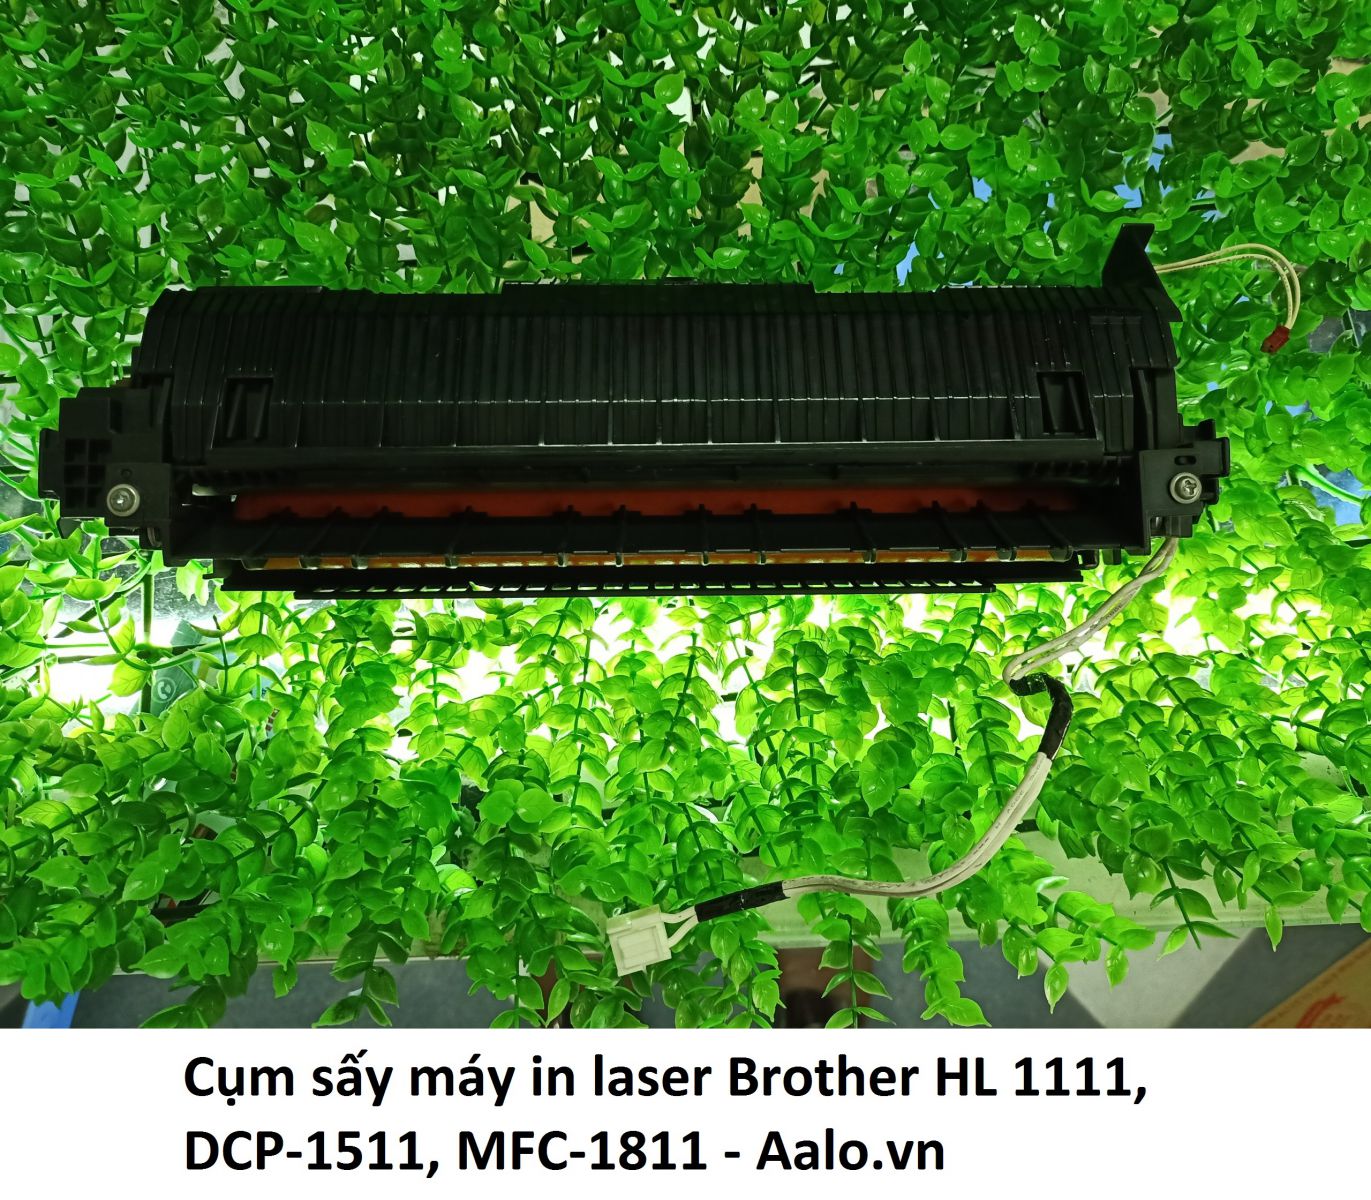 Cụm sấy máy in laser Brother HL 1111, DCP-1511, MFC-1811 - Aalo.vn